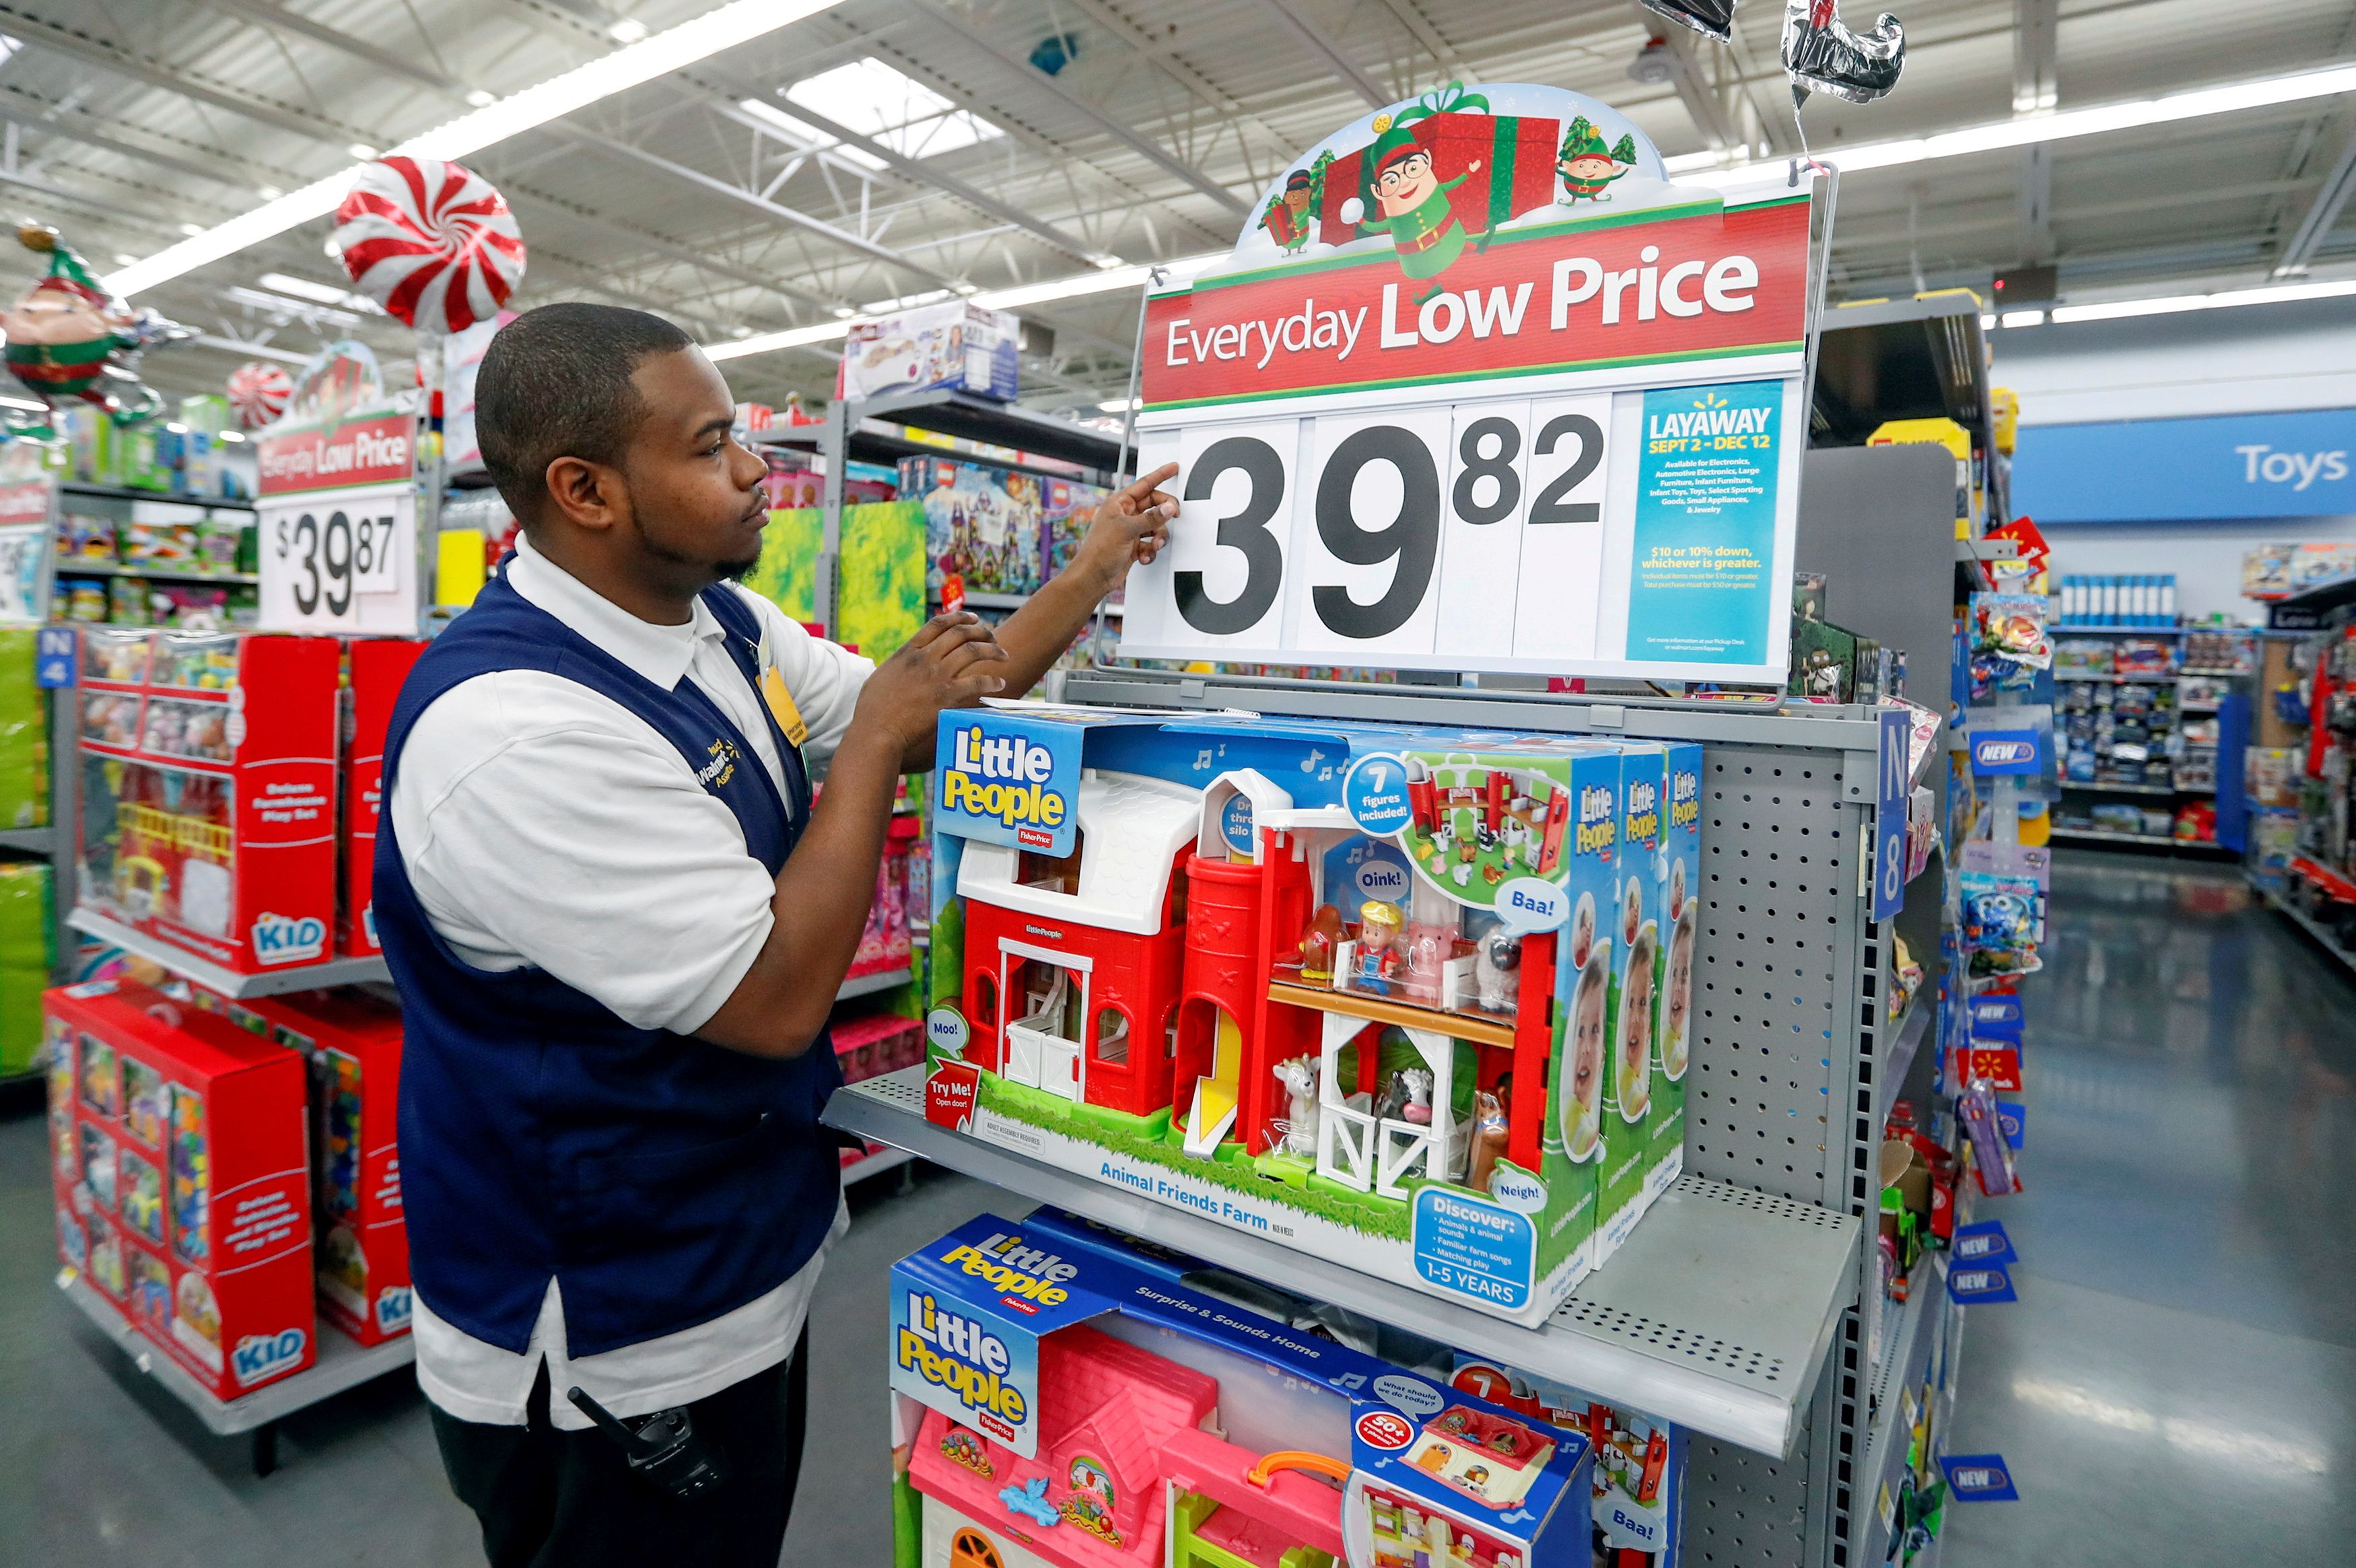 An employee puts up a price tag ahead of Black Friday at a Walmart store in Chicago, Illinois, U.S. November 23, 2016. REUTERS/Kamil Krzaczynski/File Photo